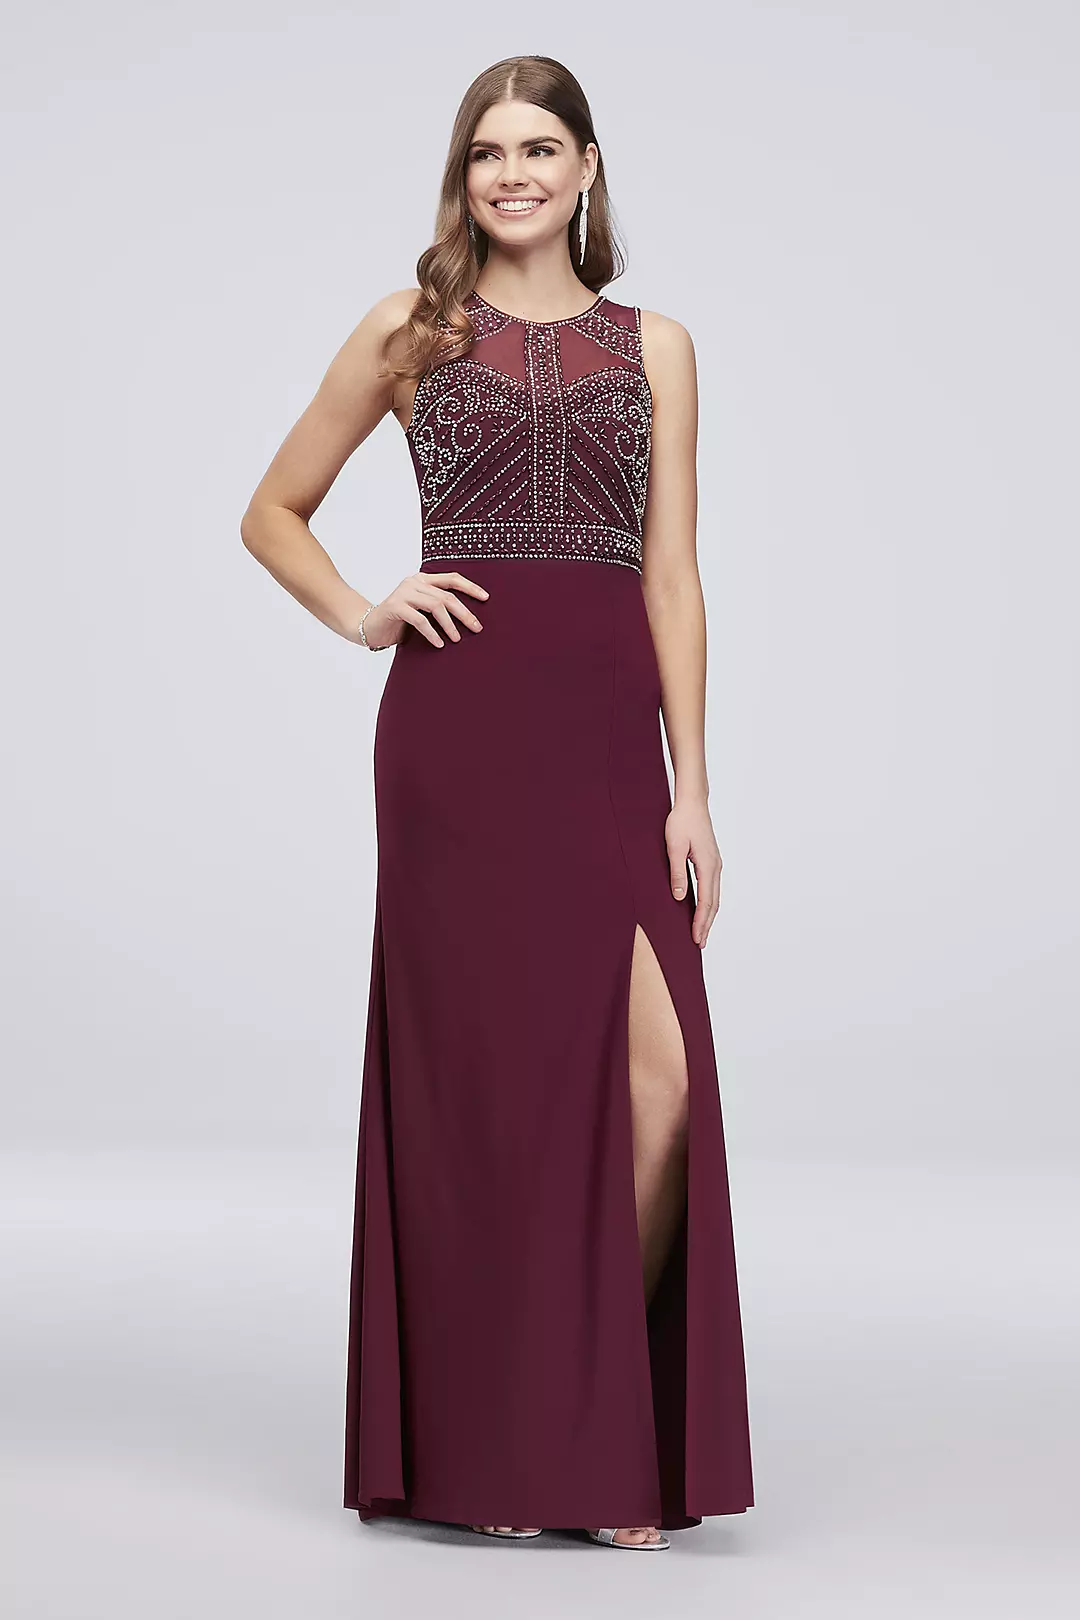 Beaded Jersey Tank Dress with Illusion Back Image